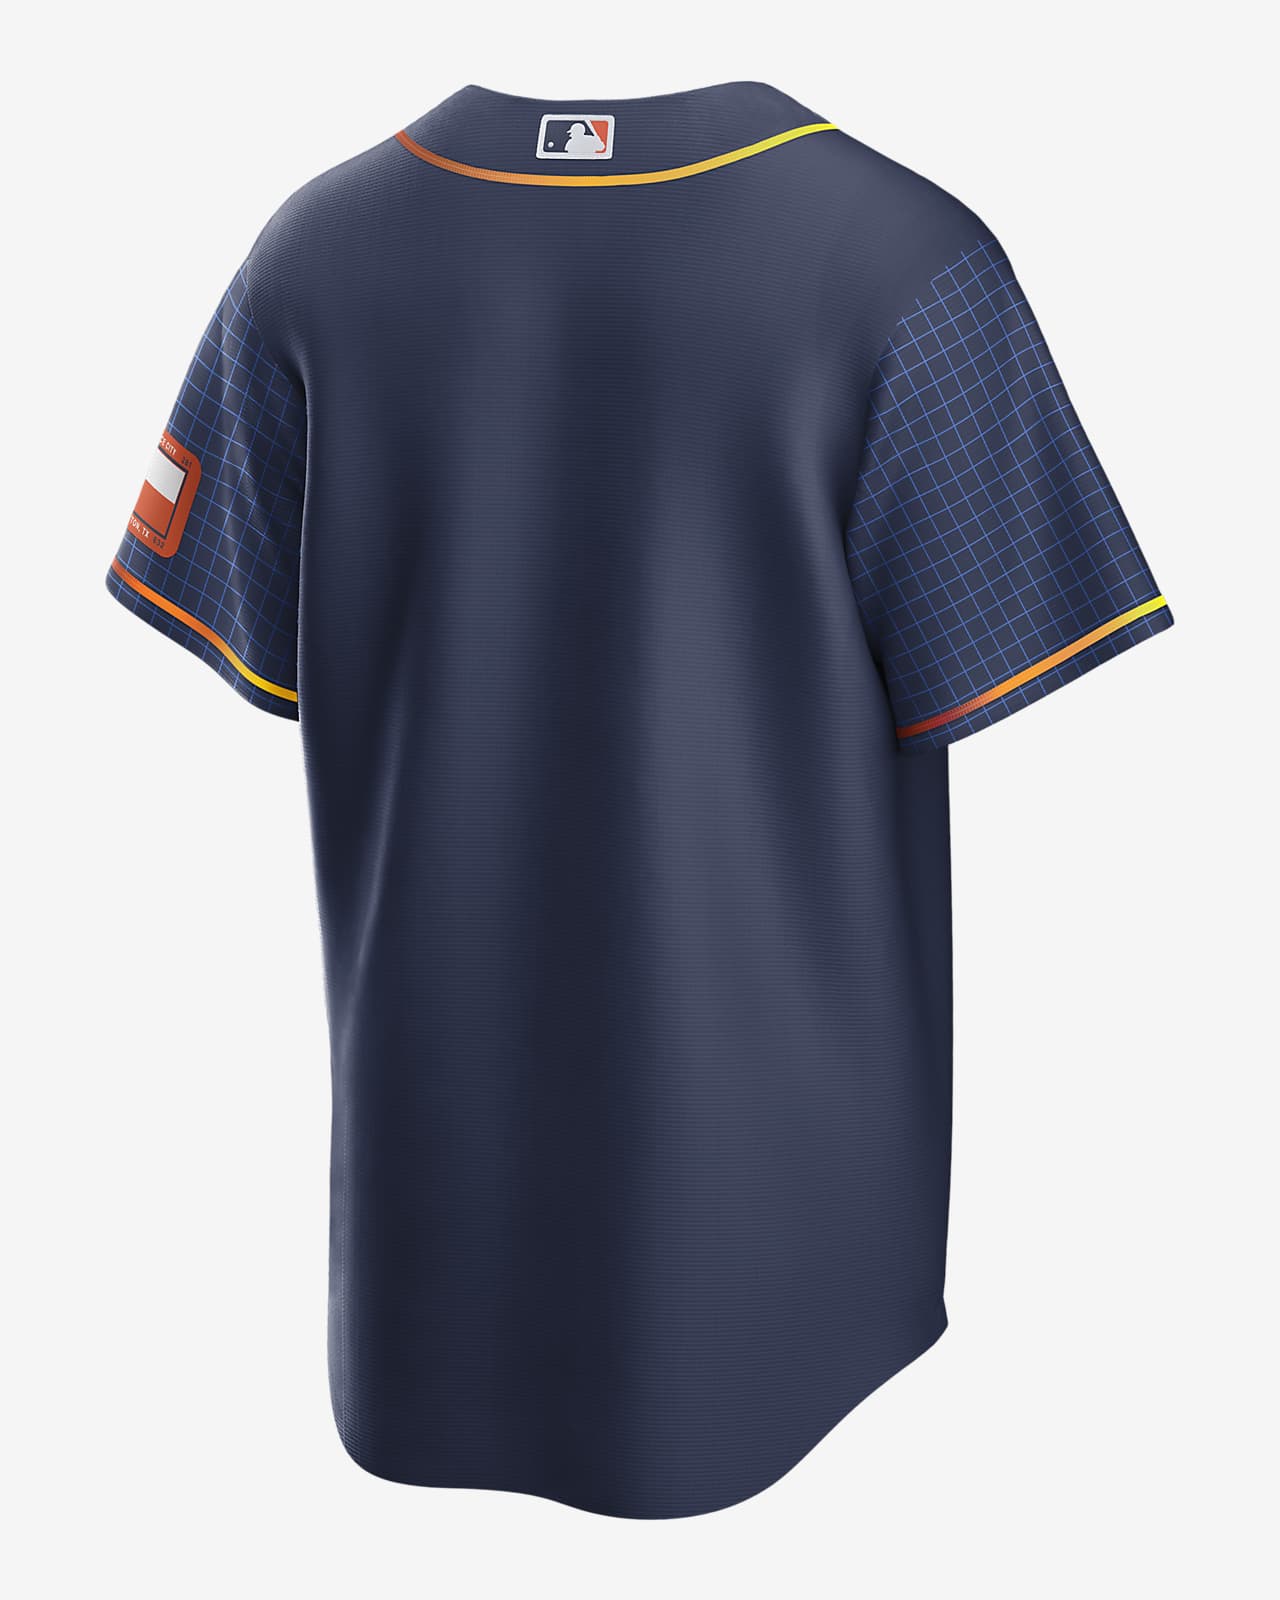 mens space city astros jersey